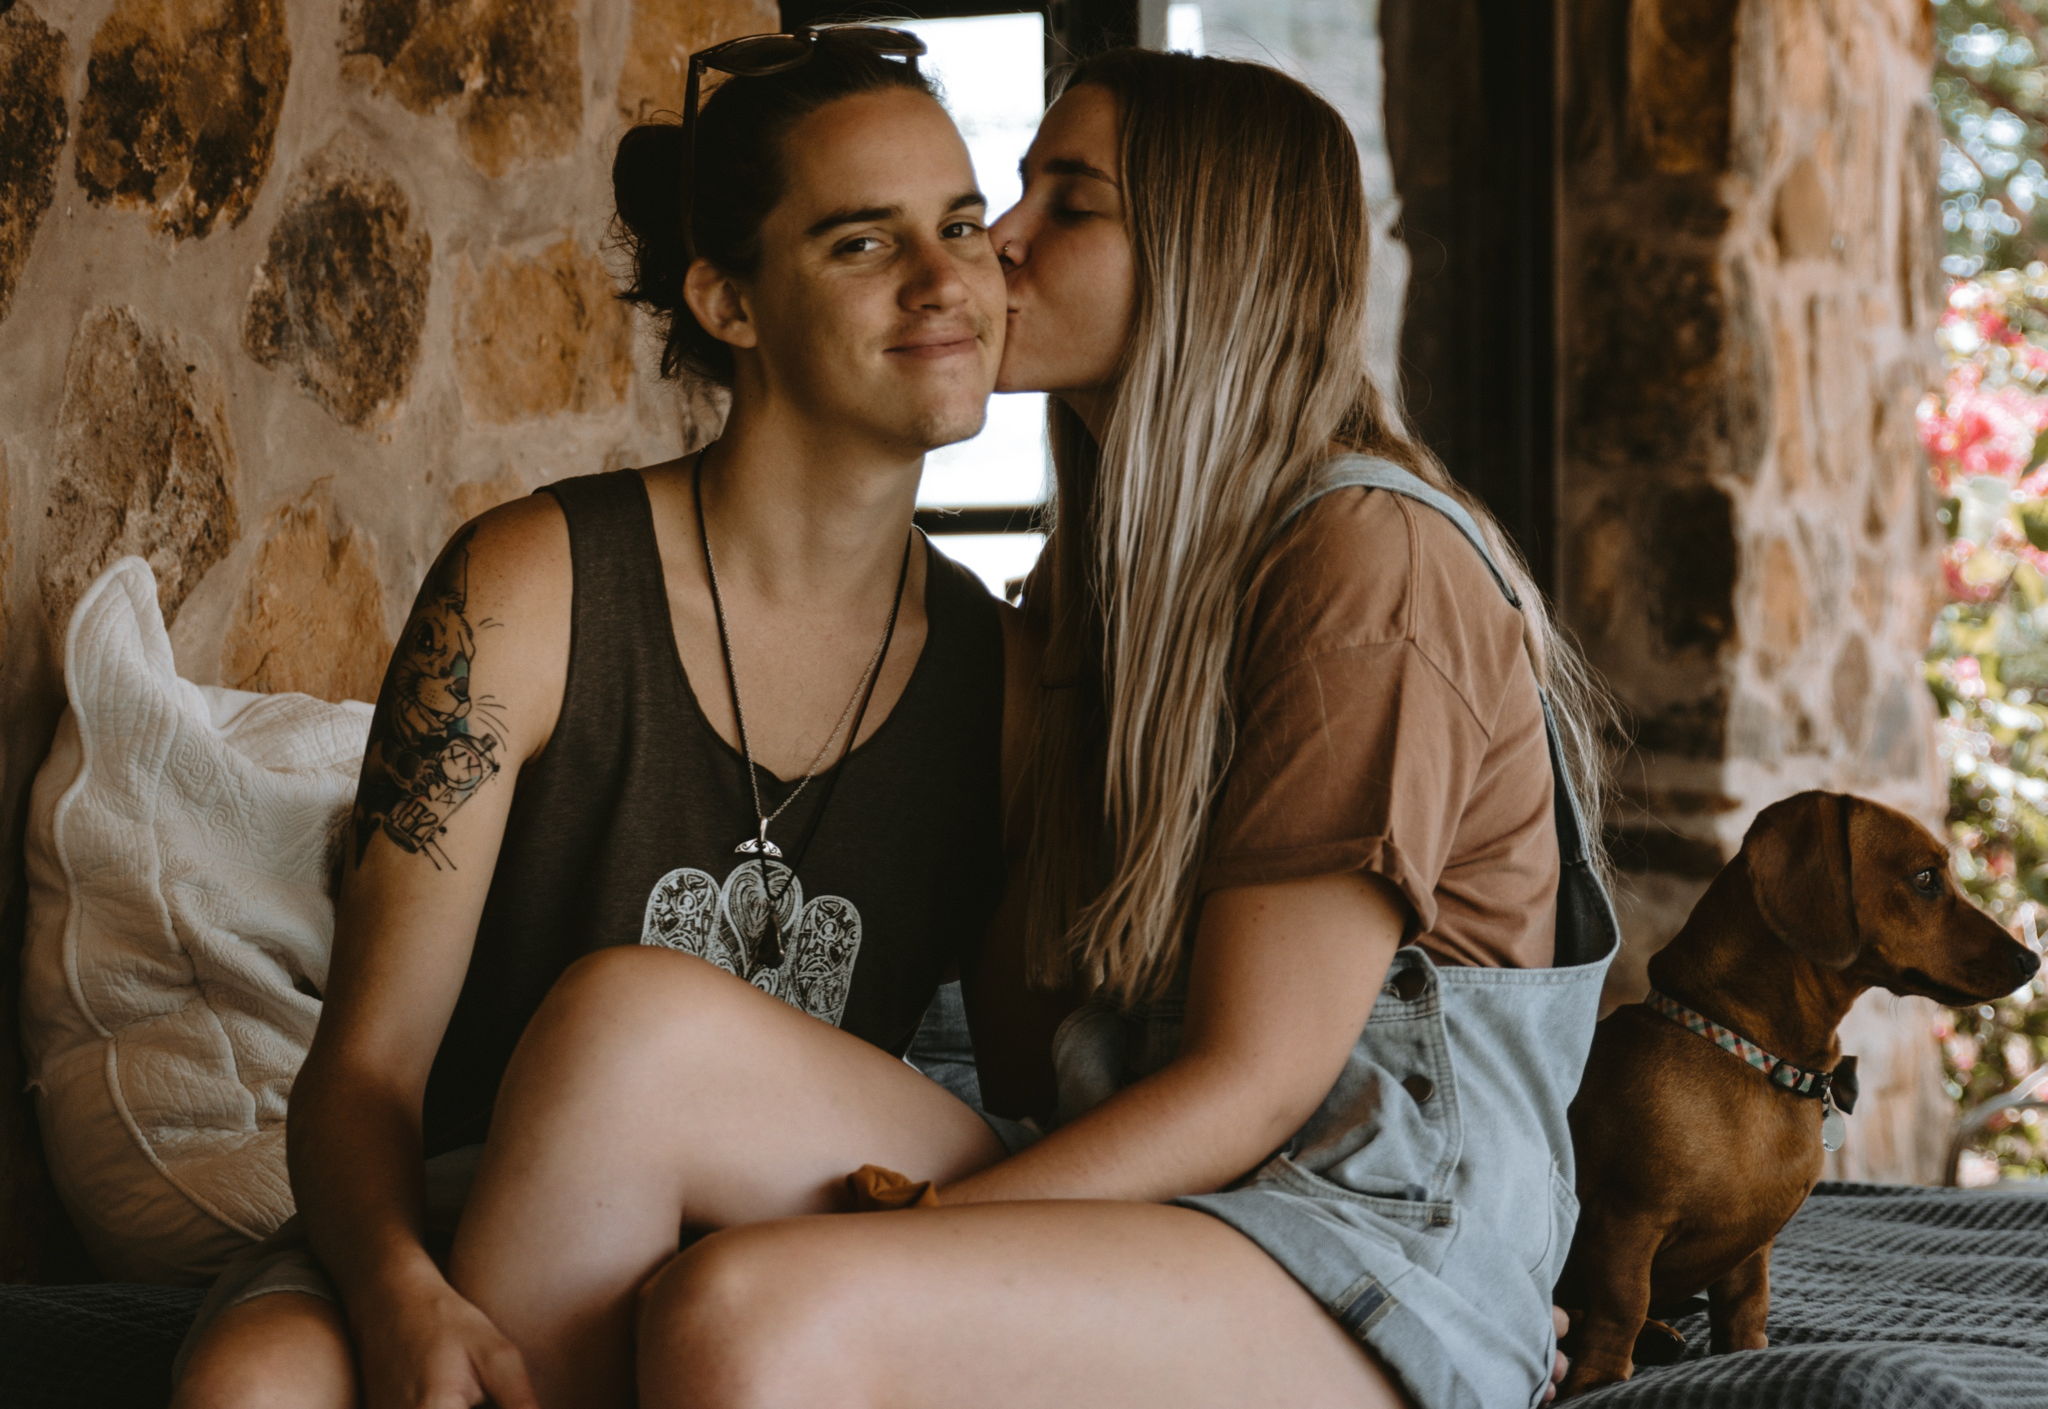 A woman sits on her side and on top of her partner kissing his cheek while he smiles and looks at the camera.